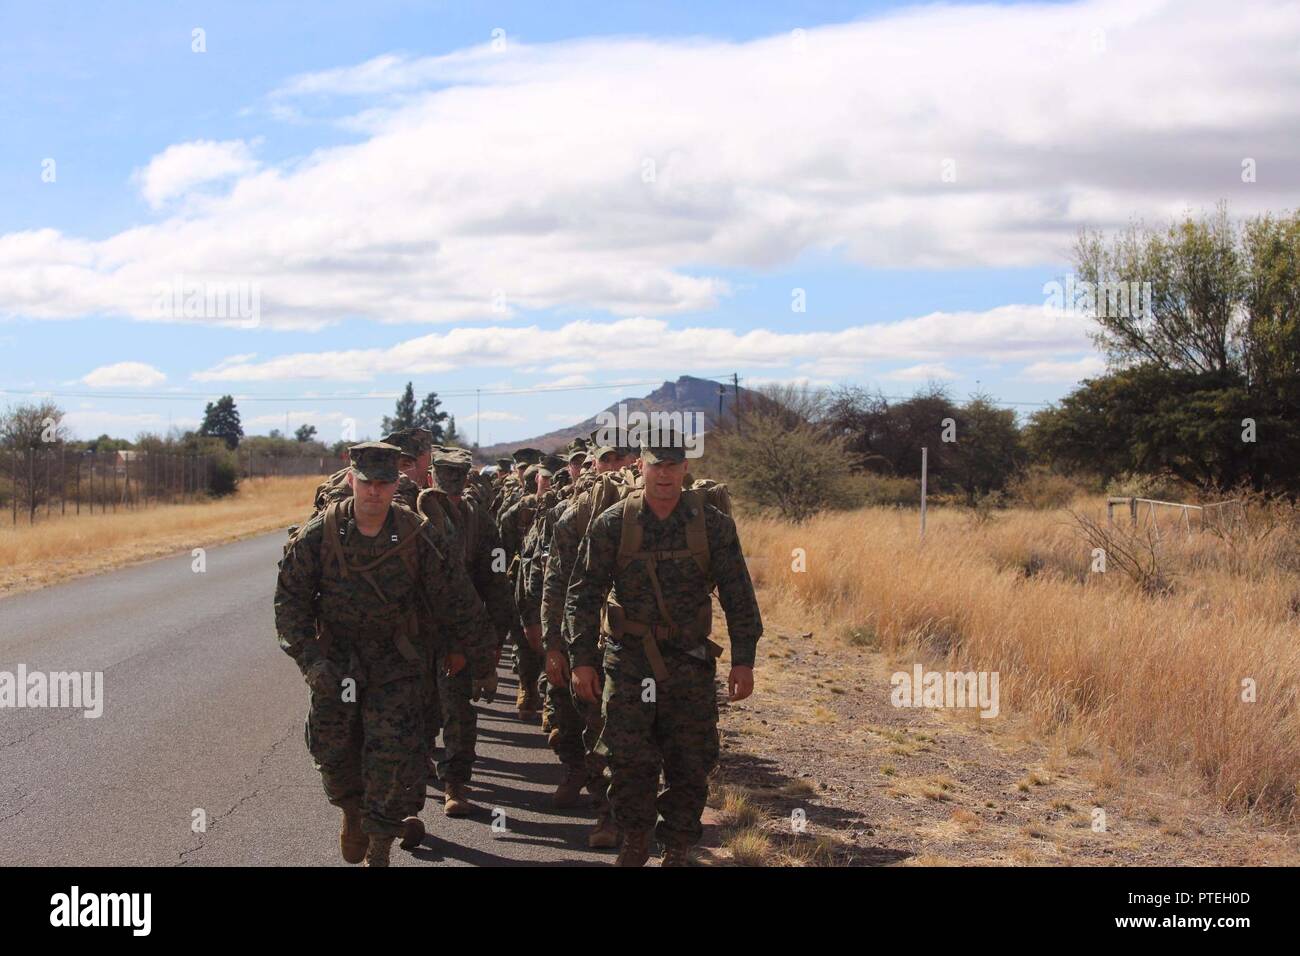 Capt. Joshua A. Bales, assigned to 3rd Battalion, 25th Marines, leads his Marines on a three mile conditioning hike as part of Shared Accord 17 (SA17) at South African Army Combat Training Center, Lohatla, South Africa, July 16, 2017. SA17 is a Joint bi-lateral Field Training Exercise with our South African partners focused on Peace Keeping Operations designed to exercise participants’ capability and capacity to conduct African Union / United Nations mandated Peace Keeping Operations. Stock Photo